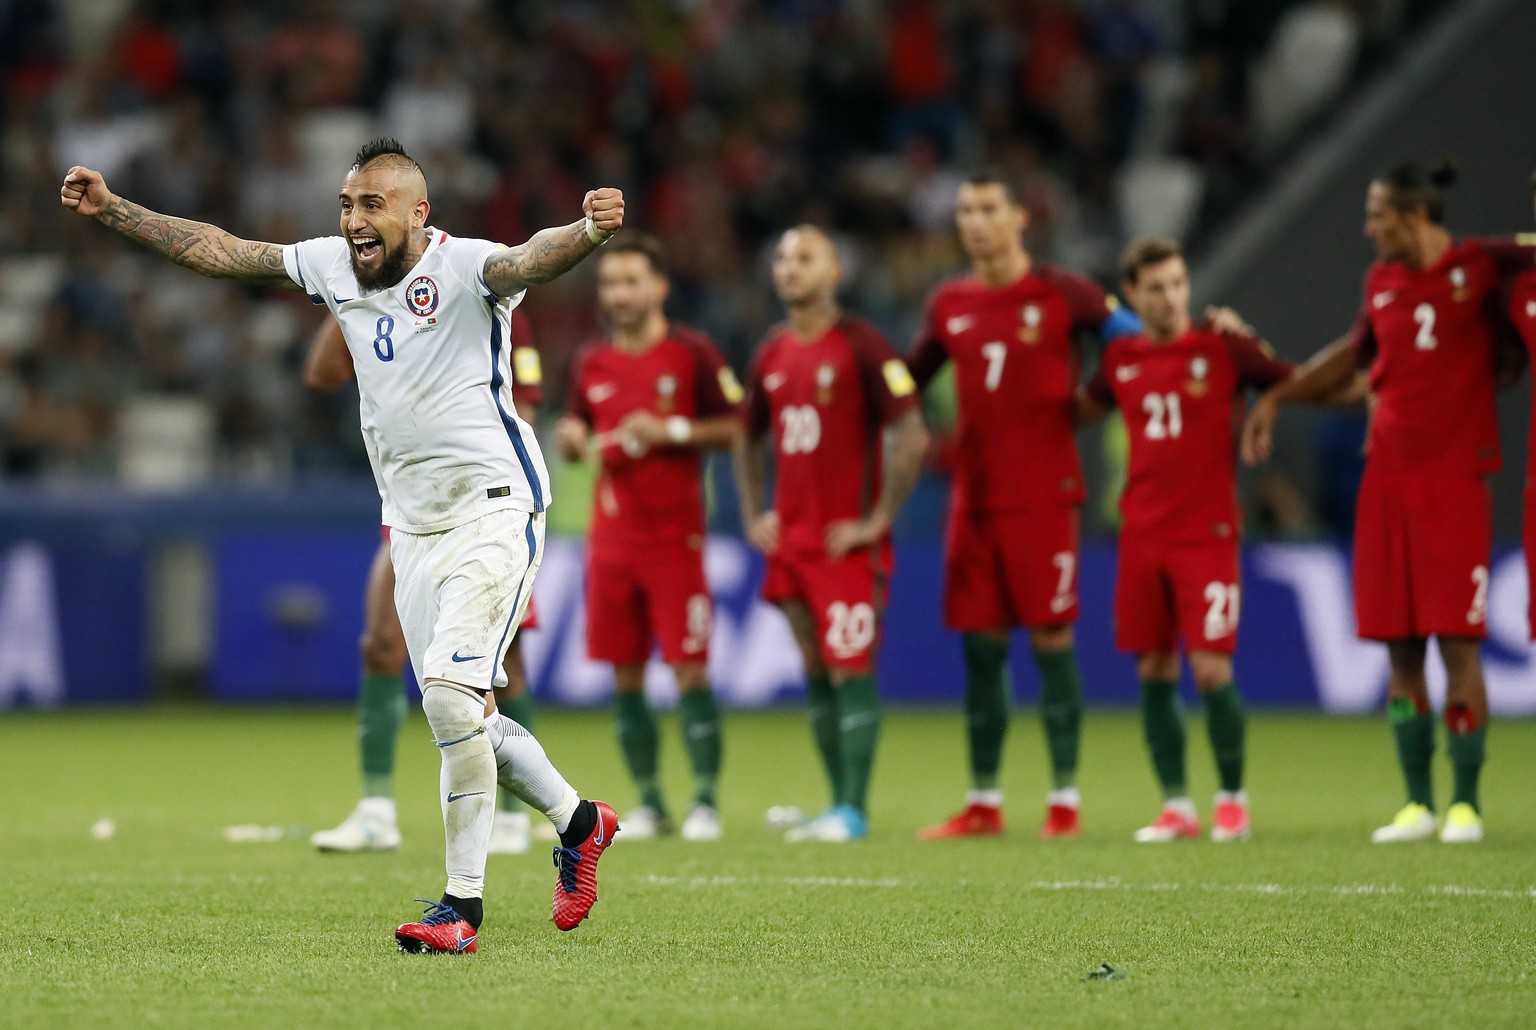 epa06055051 Arturo Vidal of Chile reacts during the penalty shootout during the FIFA Confederations Cup 2017 semi final match between Portugal and Chile at the Kazan Arena in Kazan, Russia, 28 June 20 ...